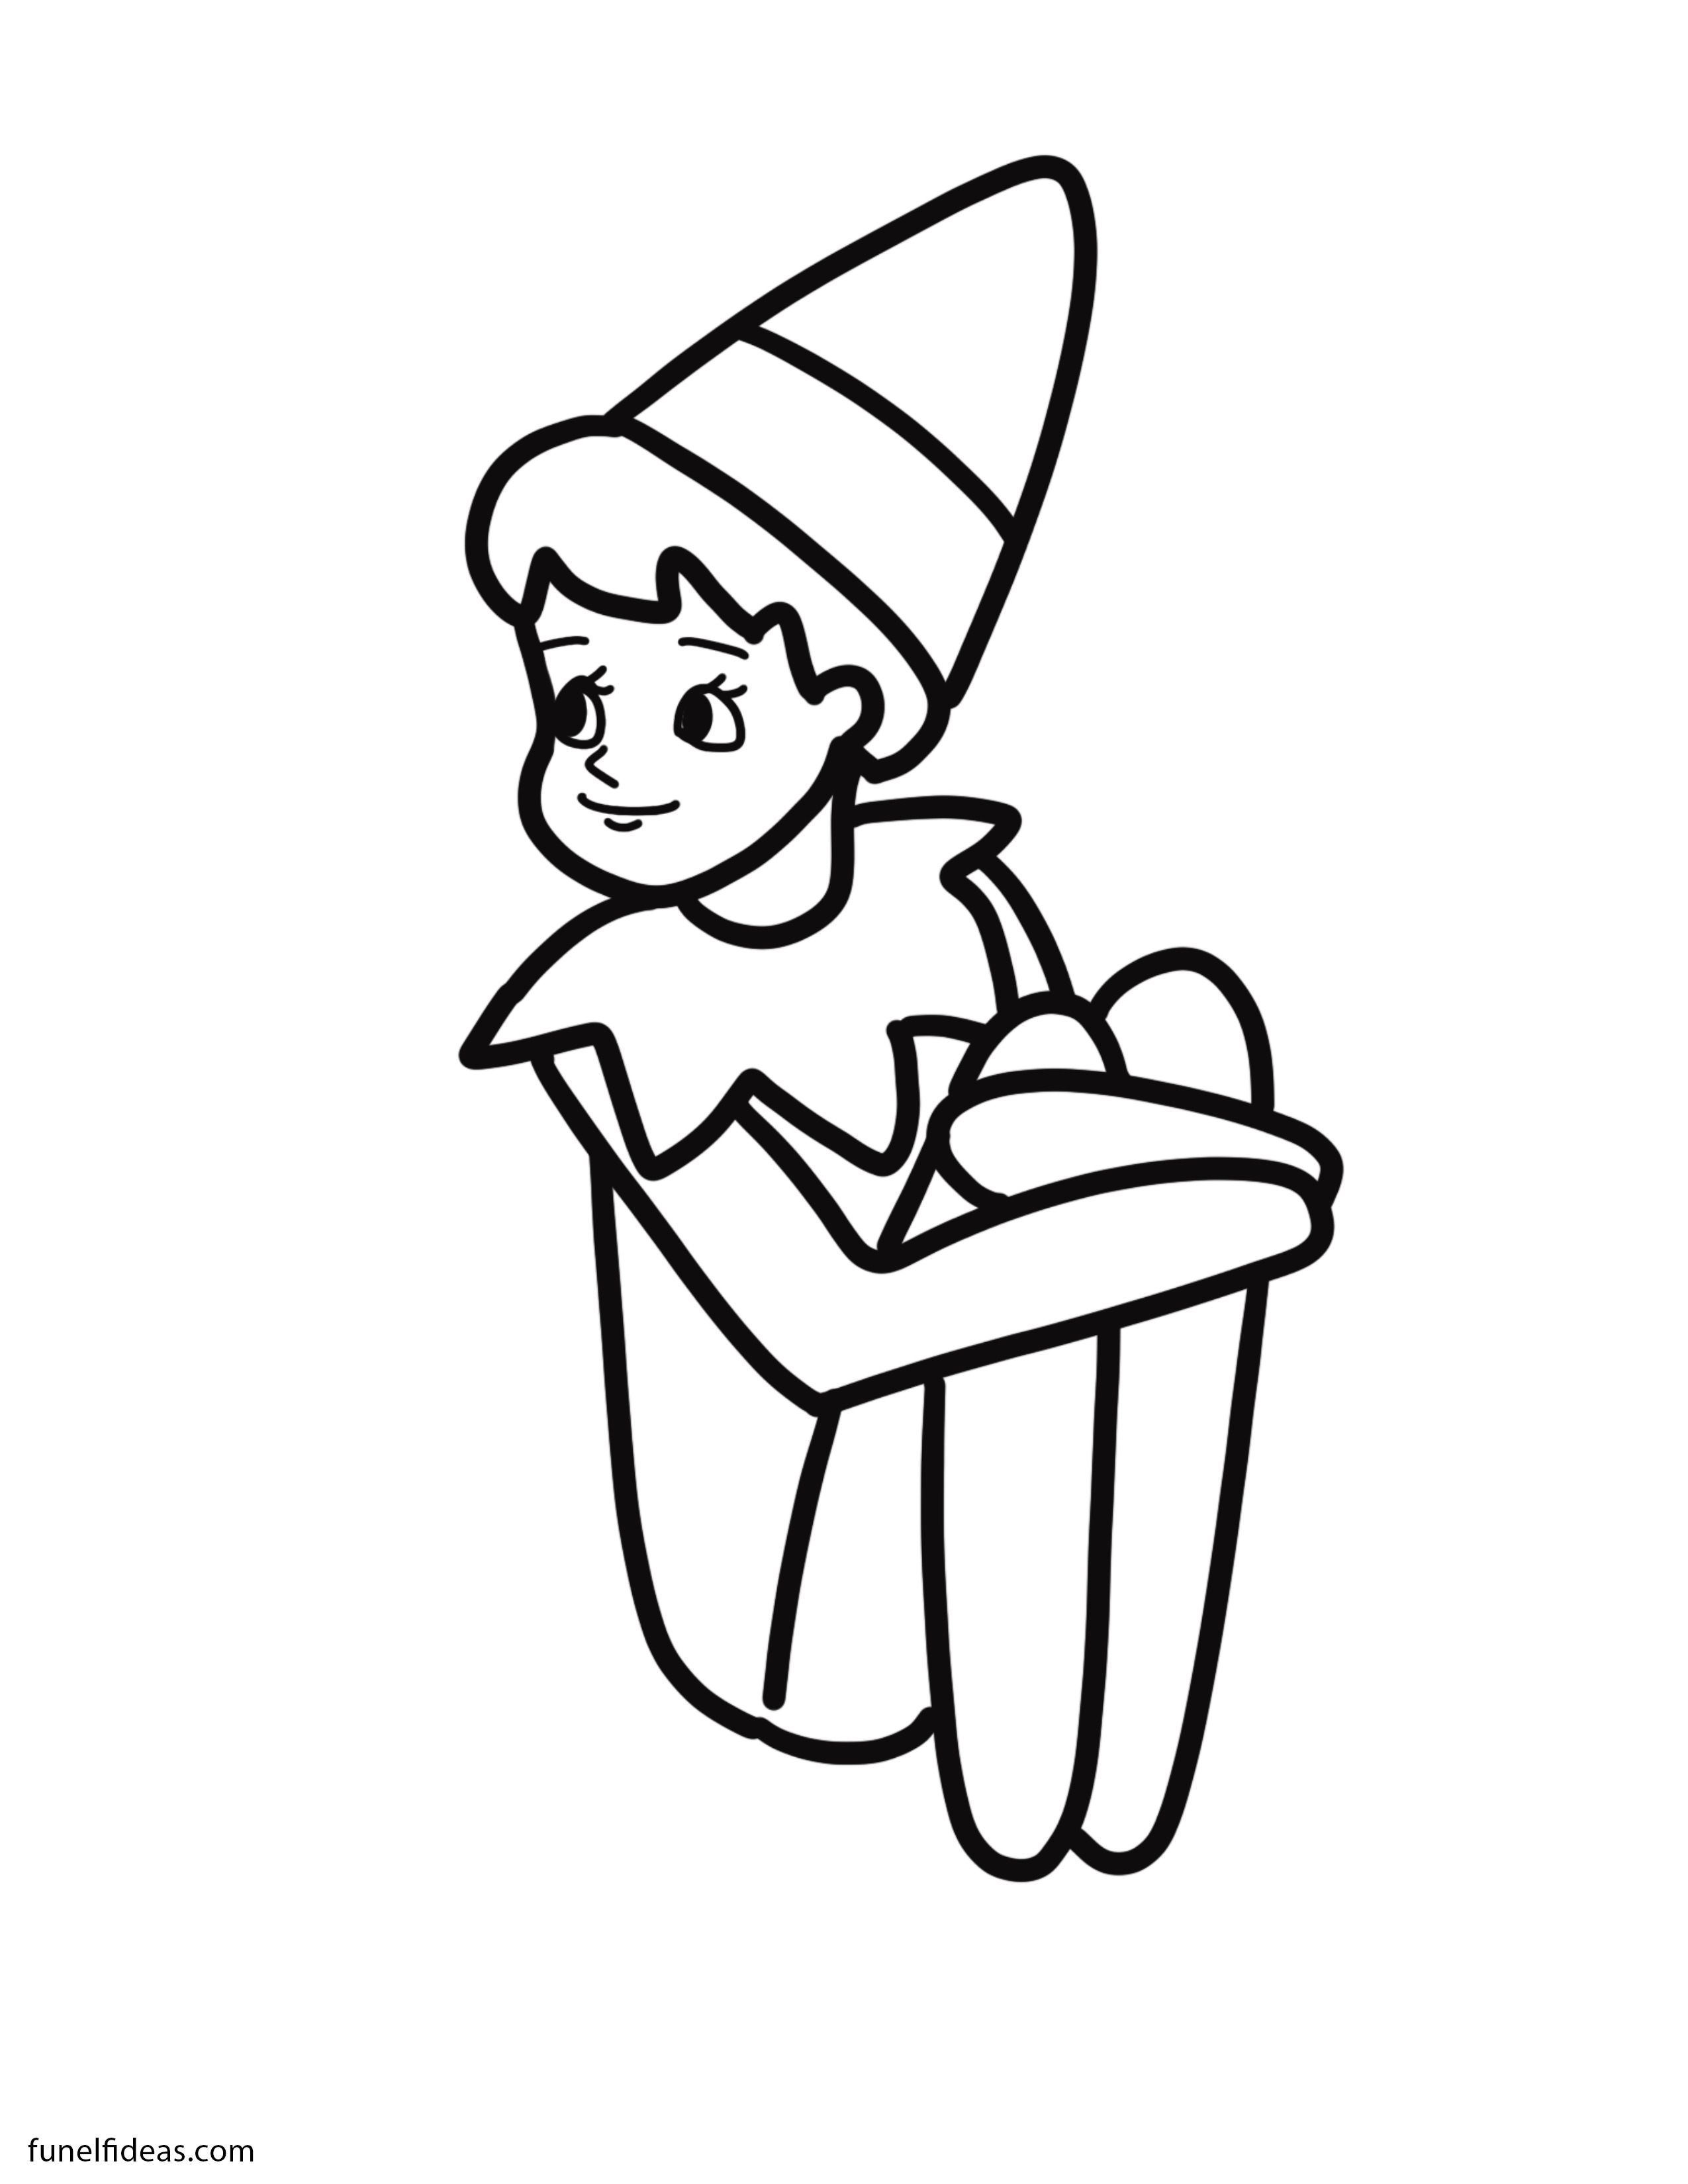 Adorable & FREE Elf On The Shelf Coloring Pages Printable